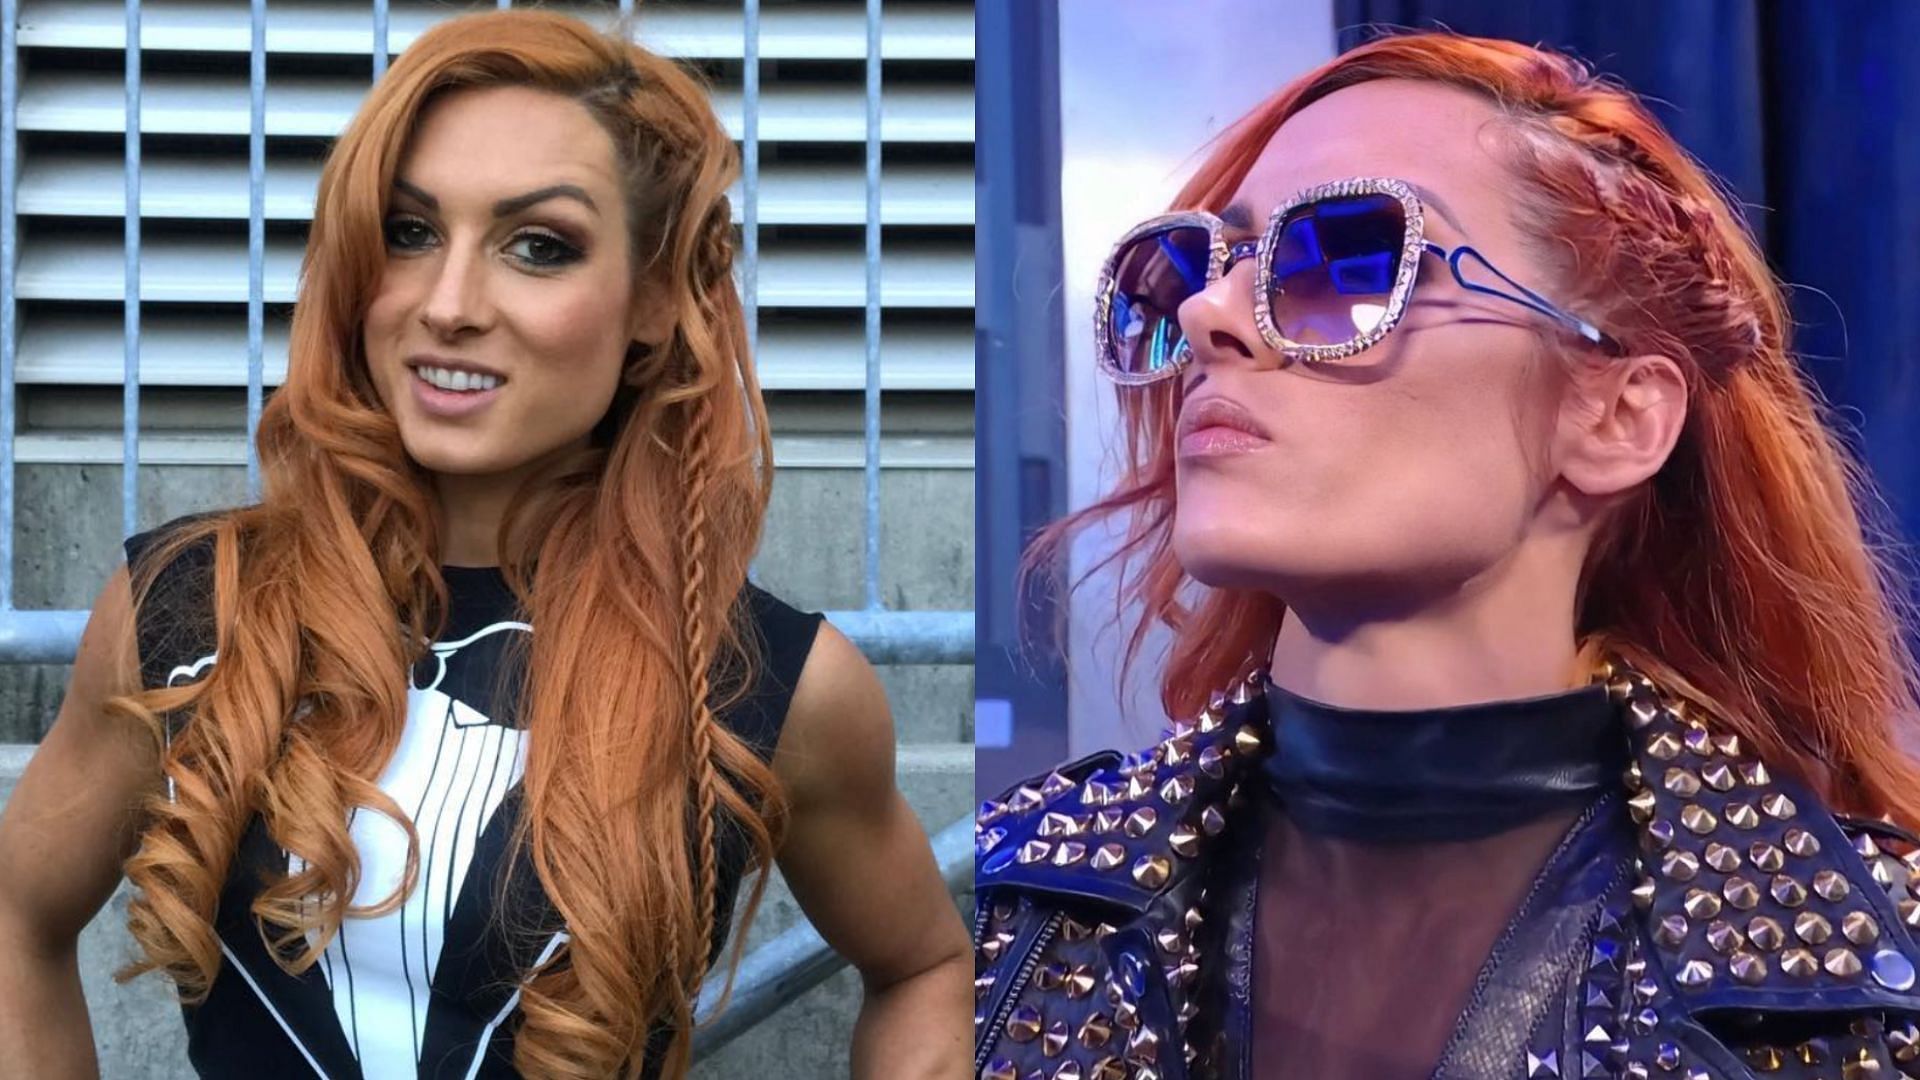 Becky Lynch is currently involved in a rivalry with Trish Stratus.